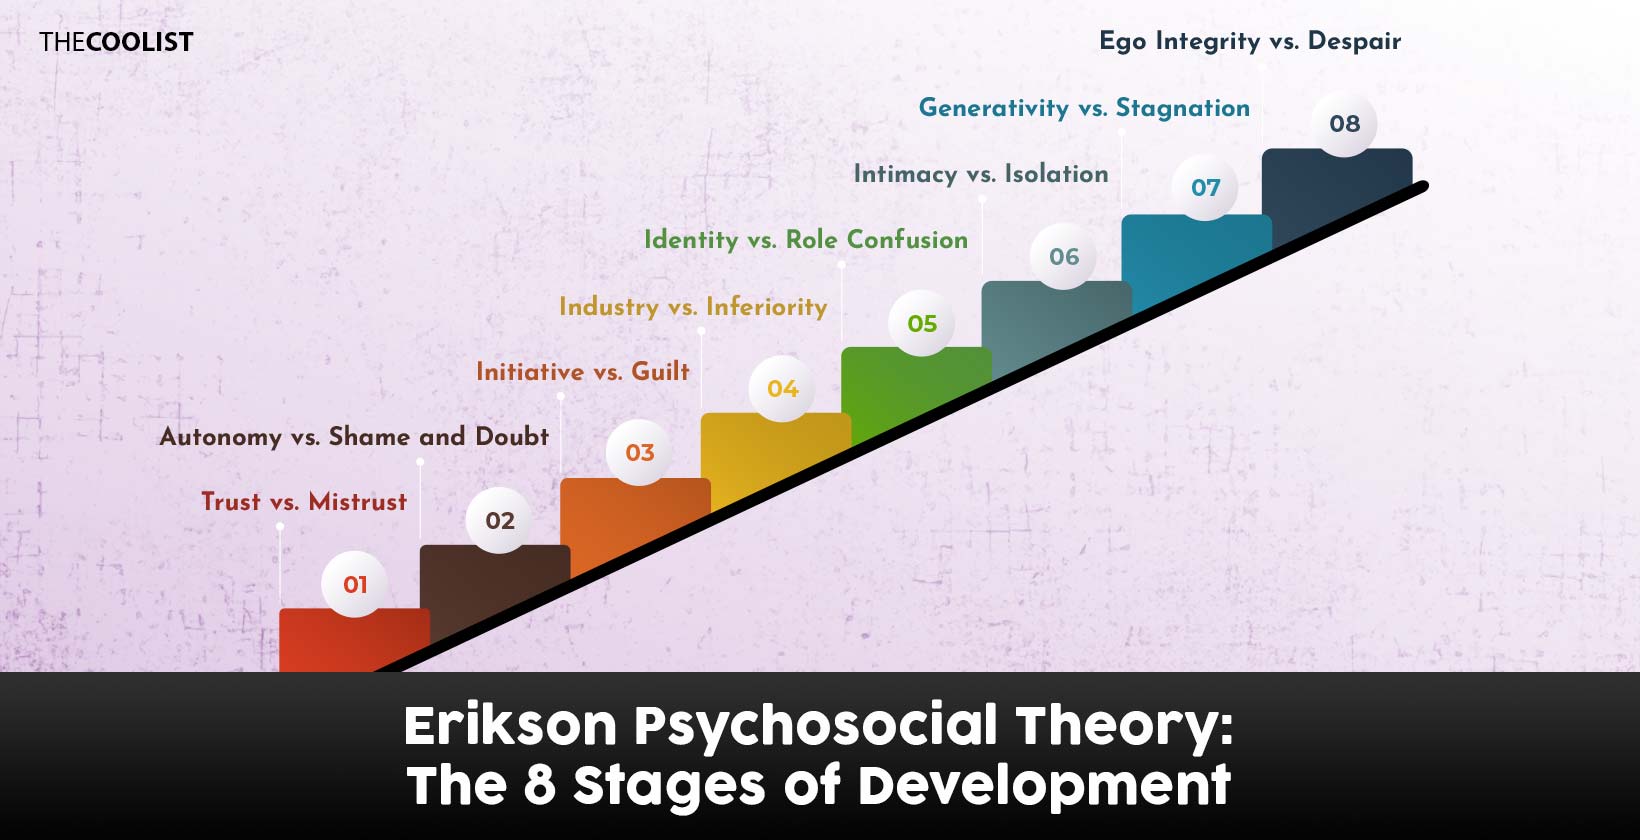 Erikson Psychosocial Theory: 8 Stages of Development